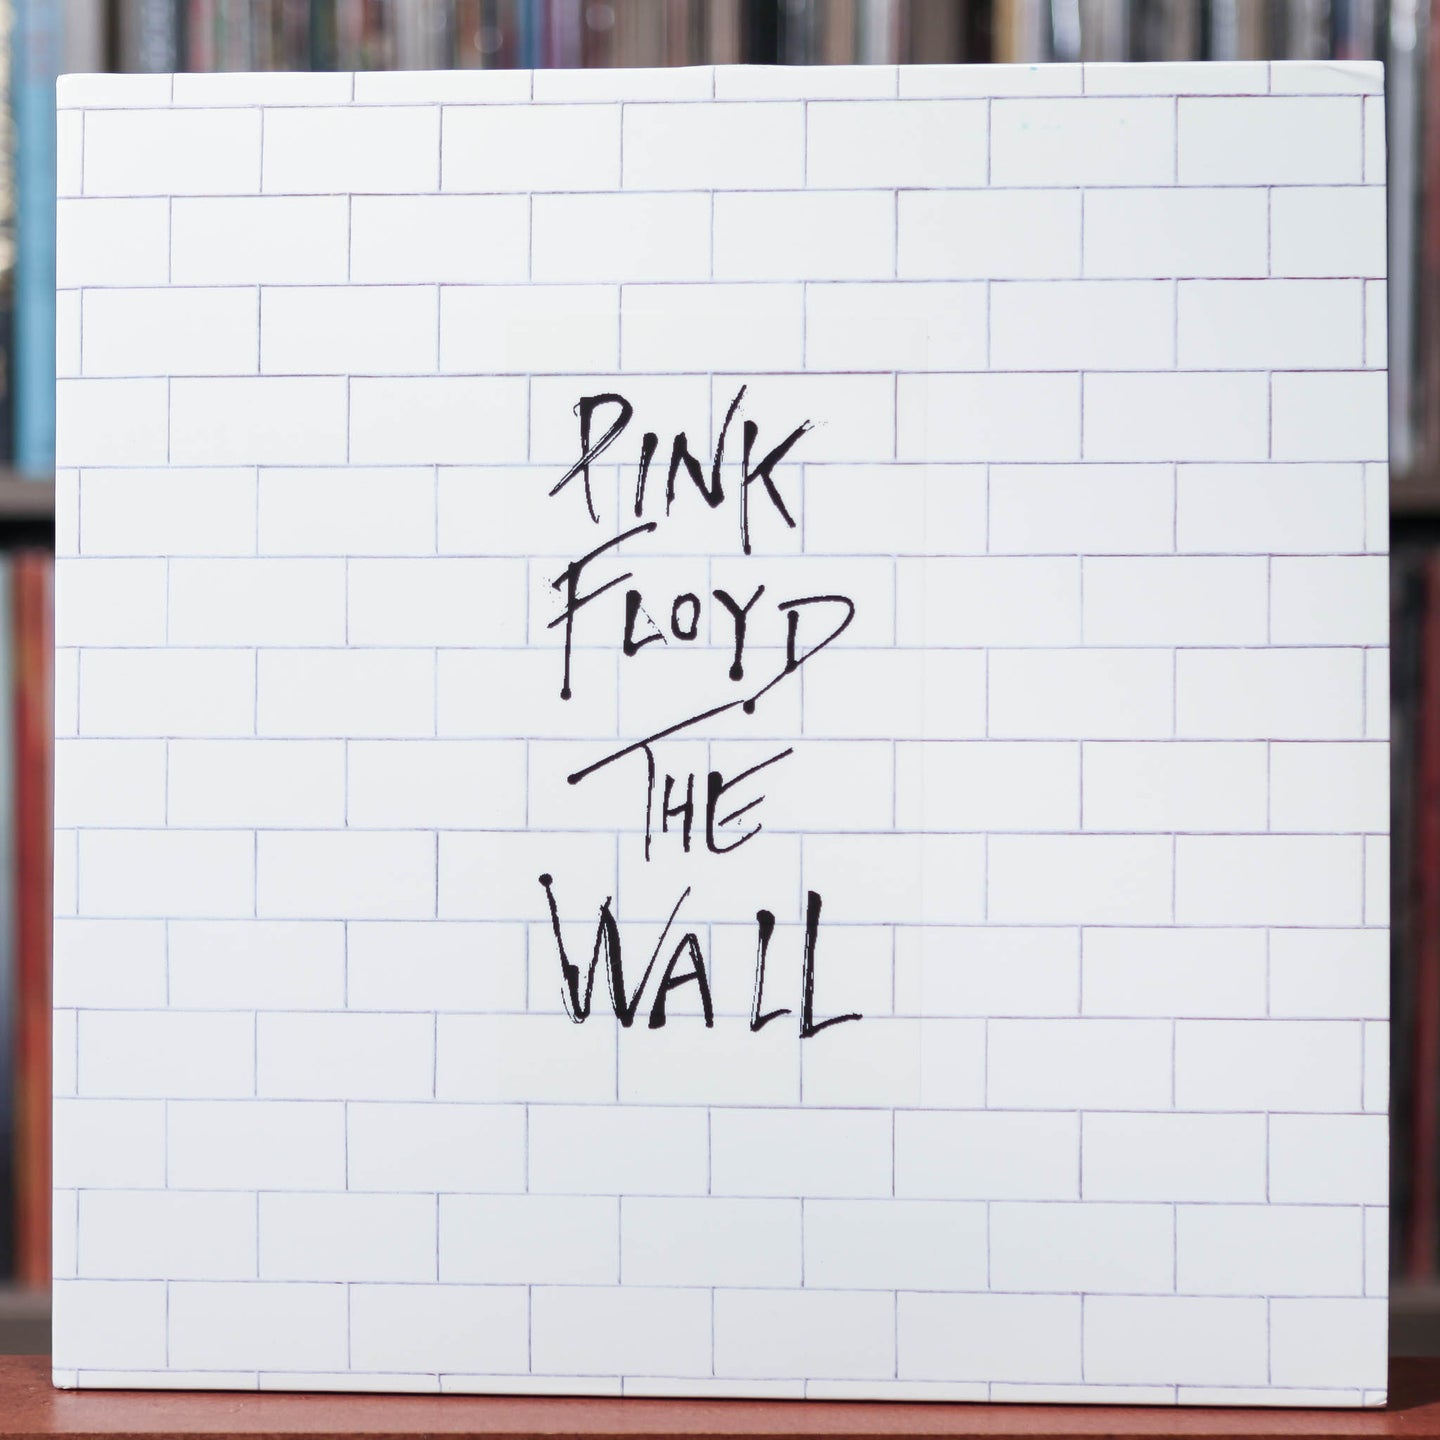 Pink Floyd - The Wall - 2LP - 2016 Pink Floyd Records, EX/EX